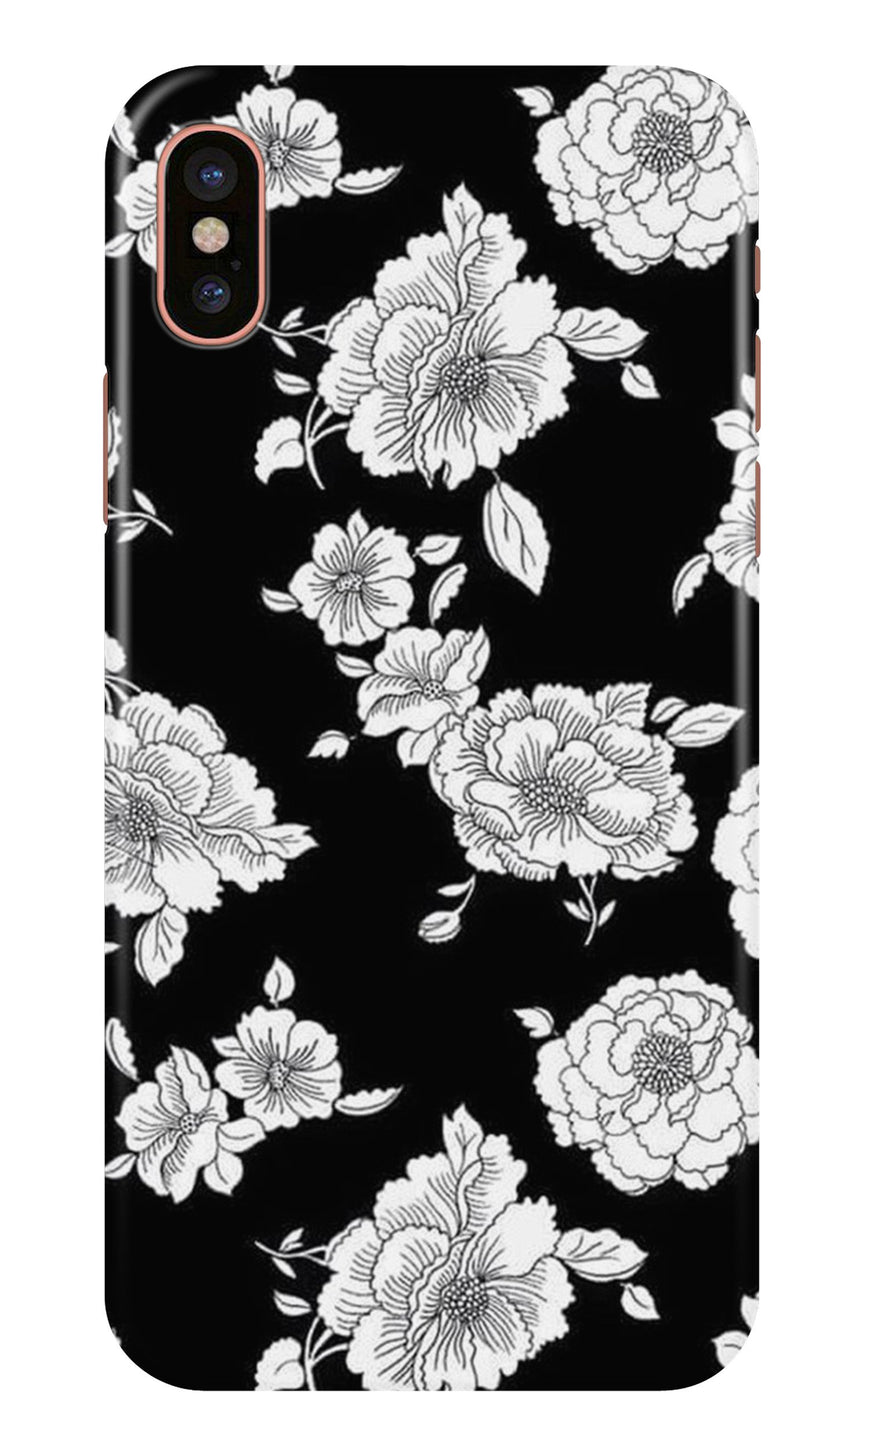 White flowers Black Background Case for iPhone Xr